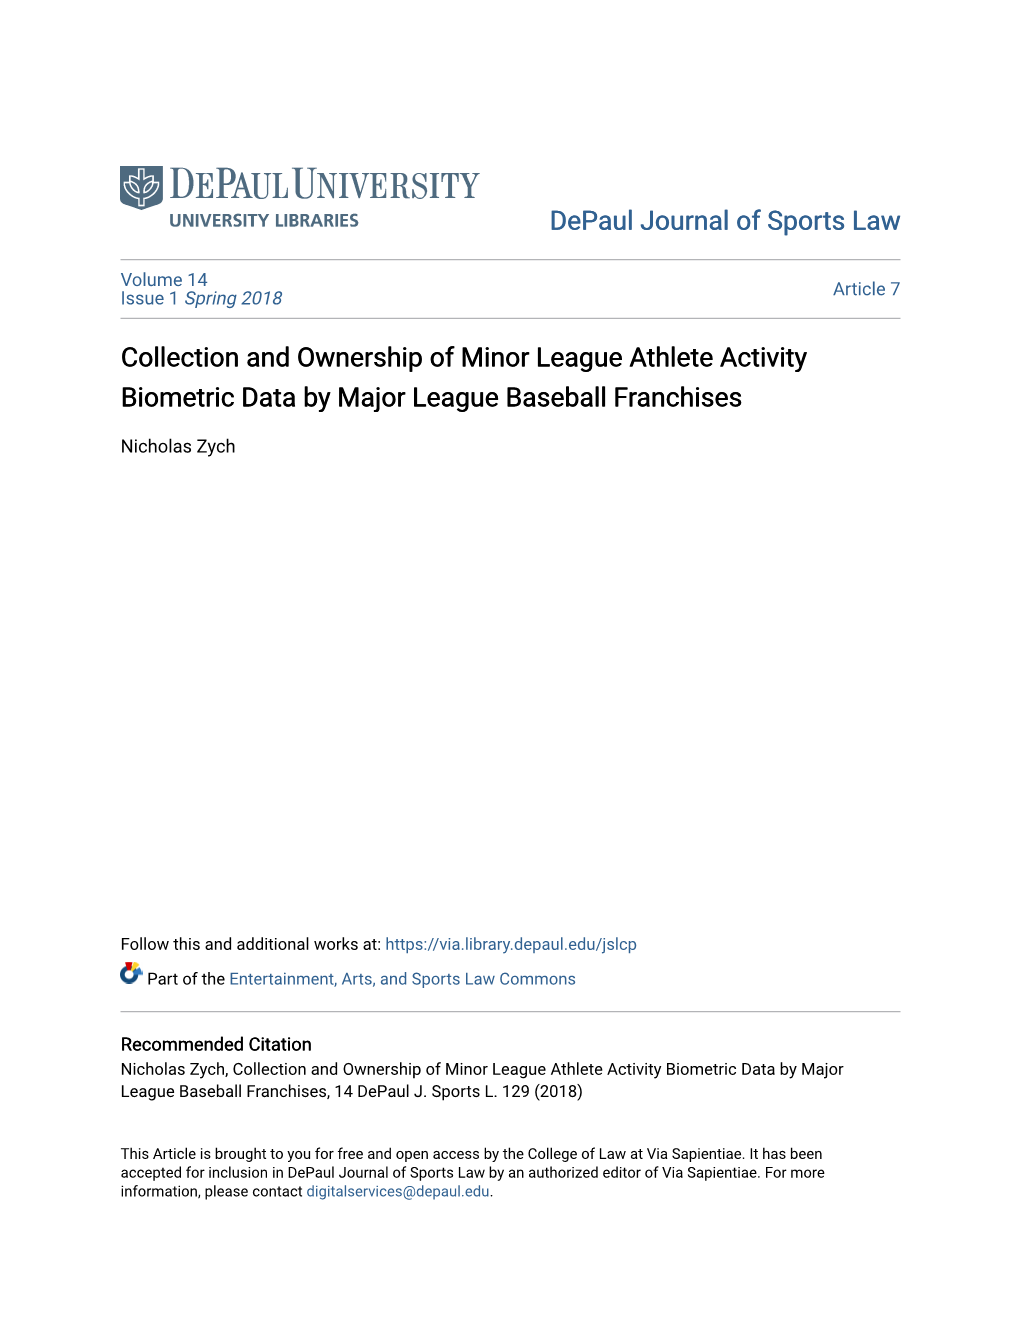 Collection and Ownership of Minor League Athlete Activity Biometric Data by Major League Baseball Franchises